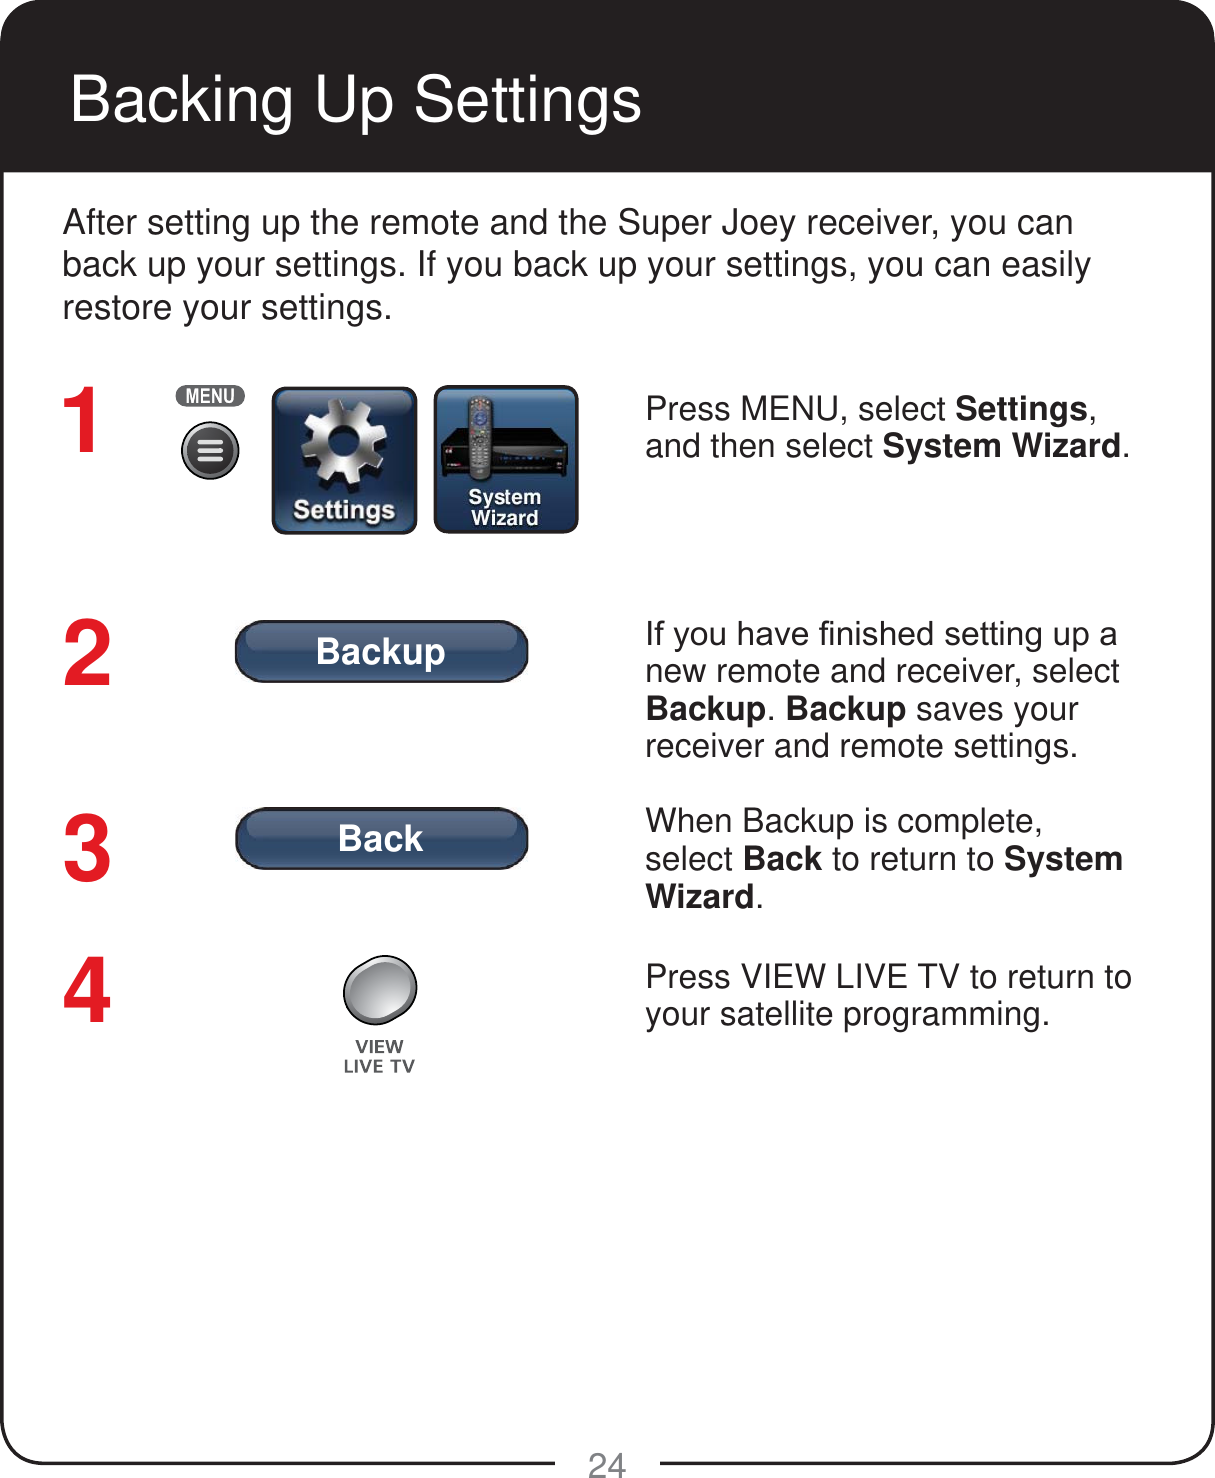 BackBackup24Backing Up SettingsAfter setting up the remote and the Super Joey receiver, you can back up your settings. If you back up your settings, you can easily restore your settings.Press MENU, select Settings, and then select System Wizard. ,I\RXKDYH¿QLVKHGVHWWLQJXSDnew remote and receiver, select Backup. Backup saves your receiver and remote settings.When Backup is complete, select Back to return to System Wizard. Press VIEW LIVE TV to return to your satellite programming.1234